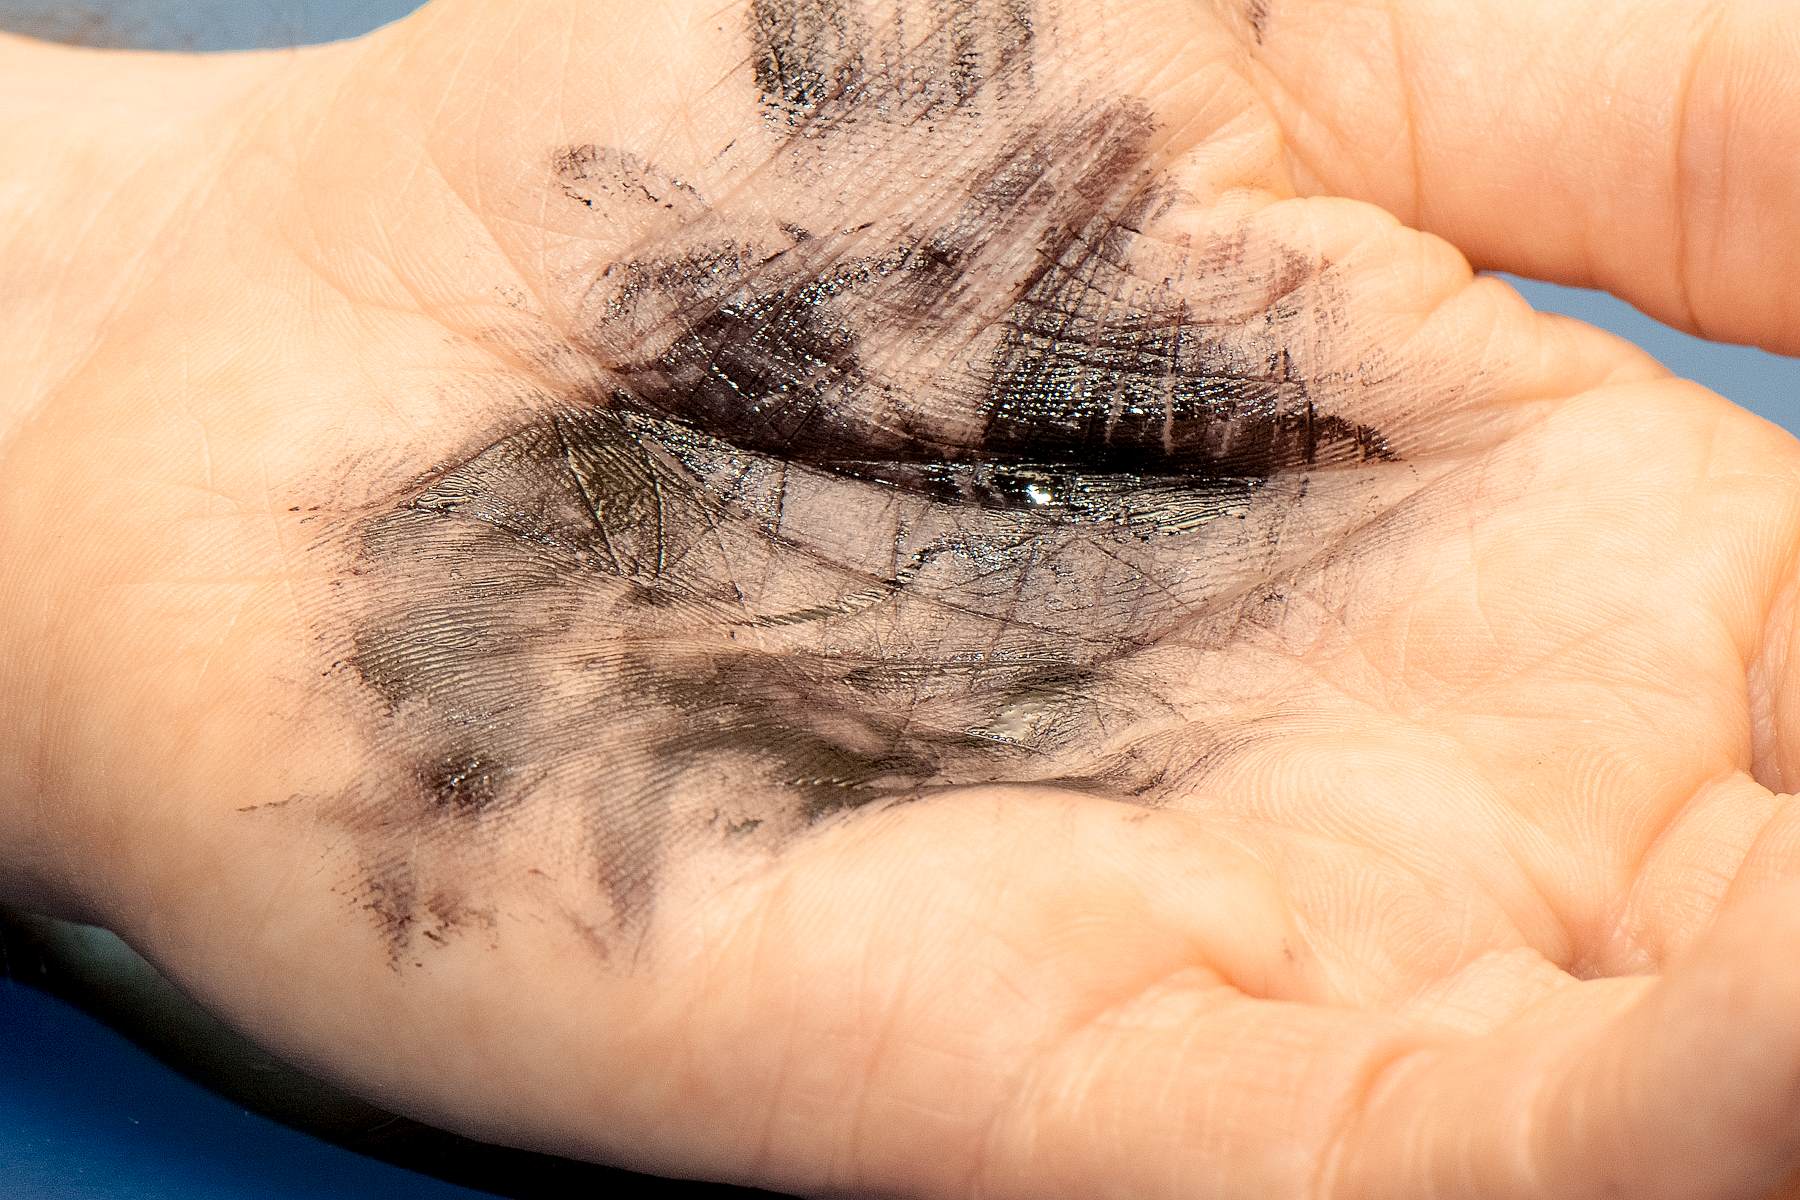 Quick And Easy Hack To Remove Dry Ink From Hands! Can You Eat Chips With Ink-Stained Hands?